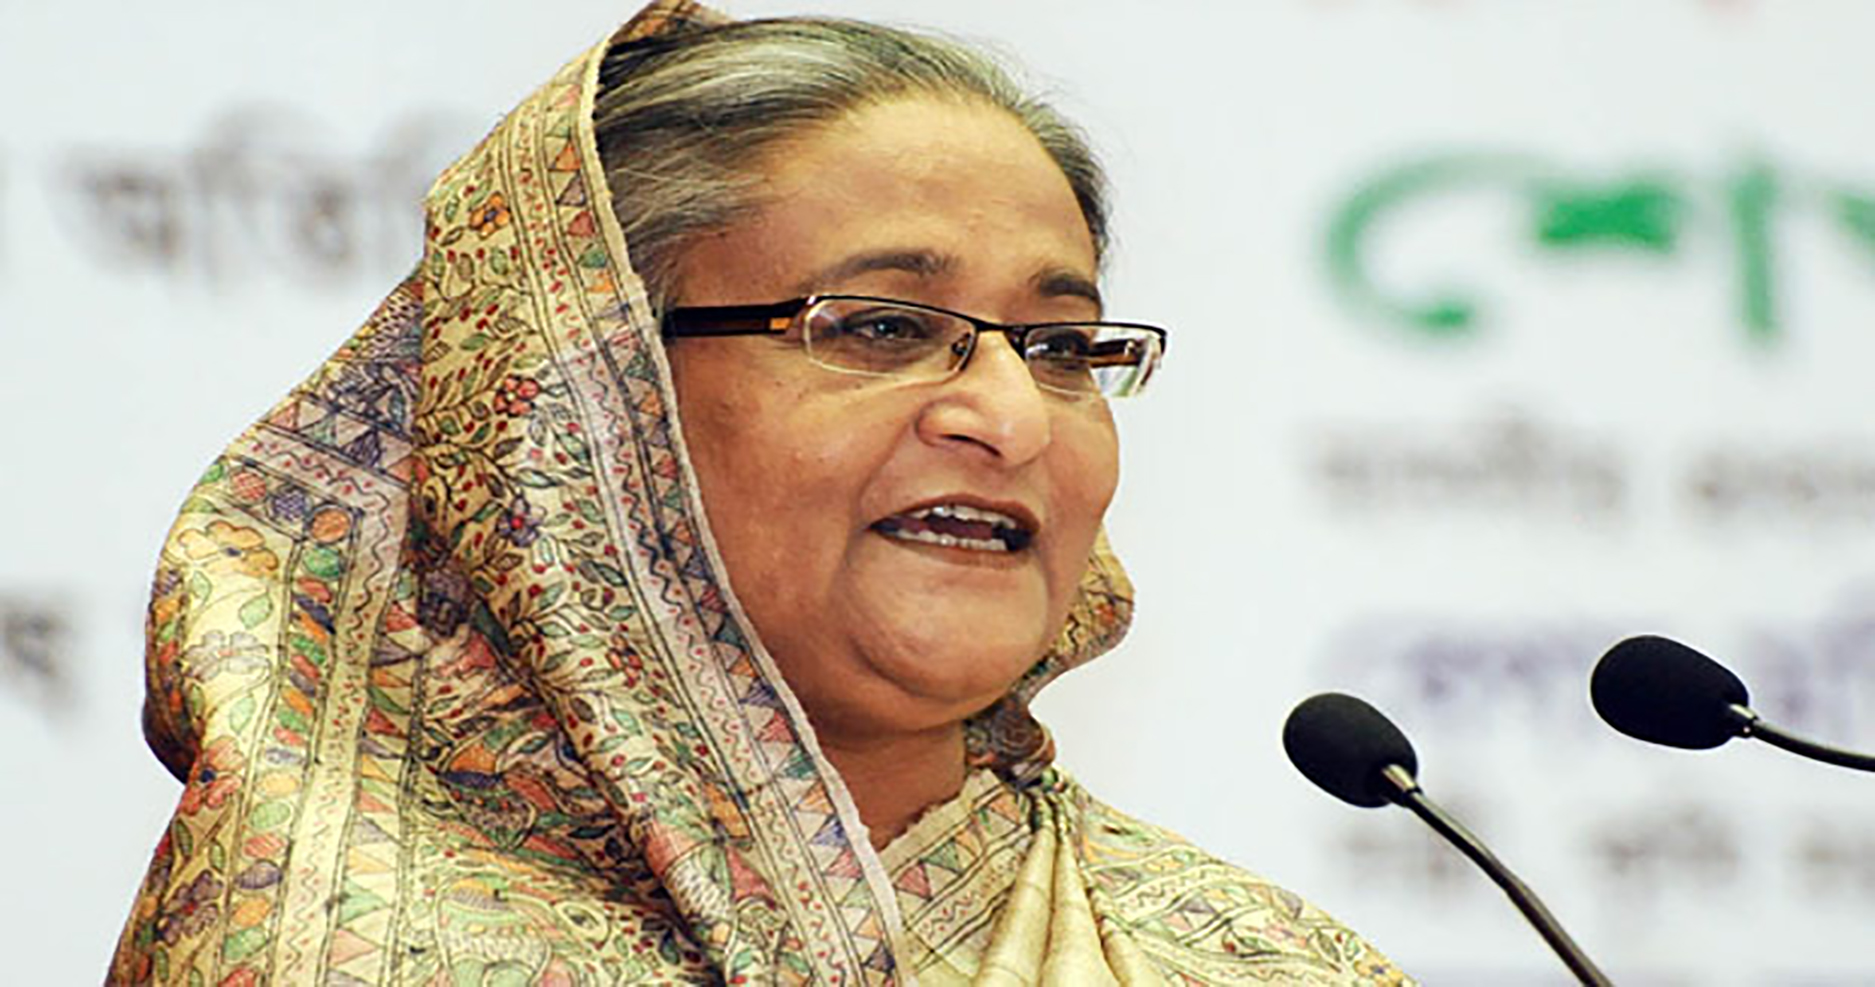 ‘Sheikh Hasina expresses delight over Tigers’ victory against Pakistan’